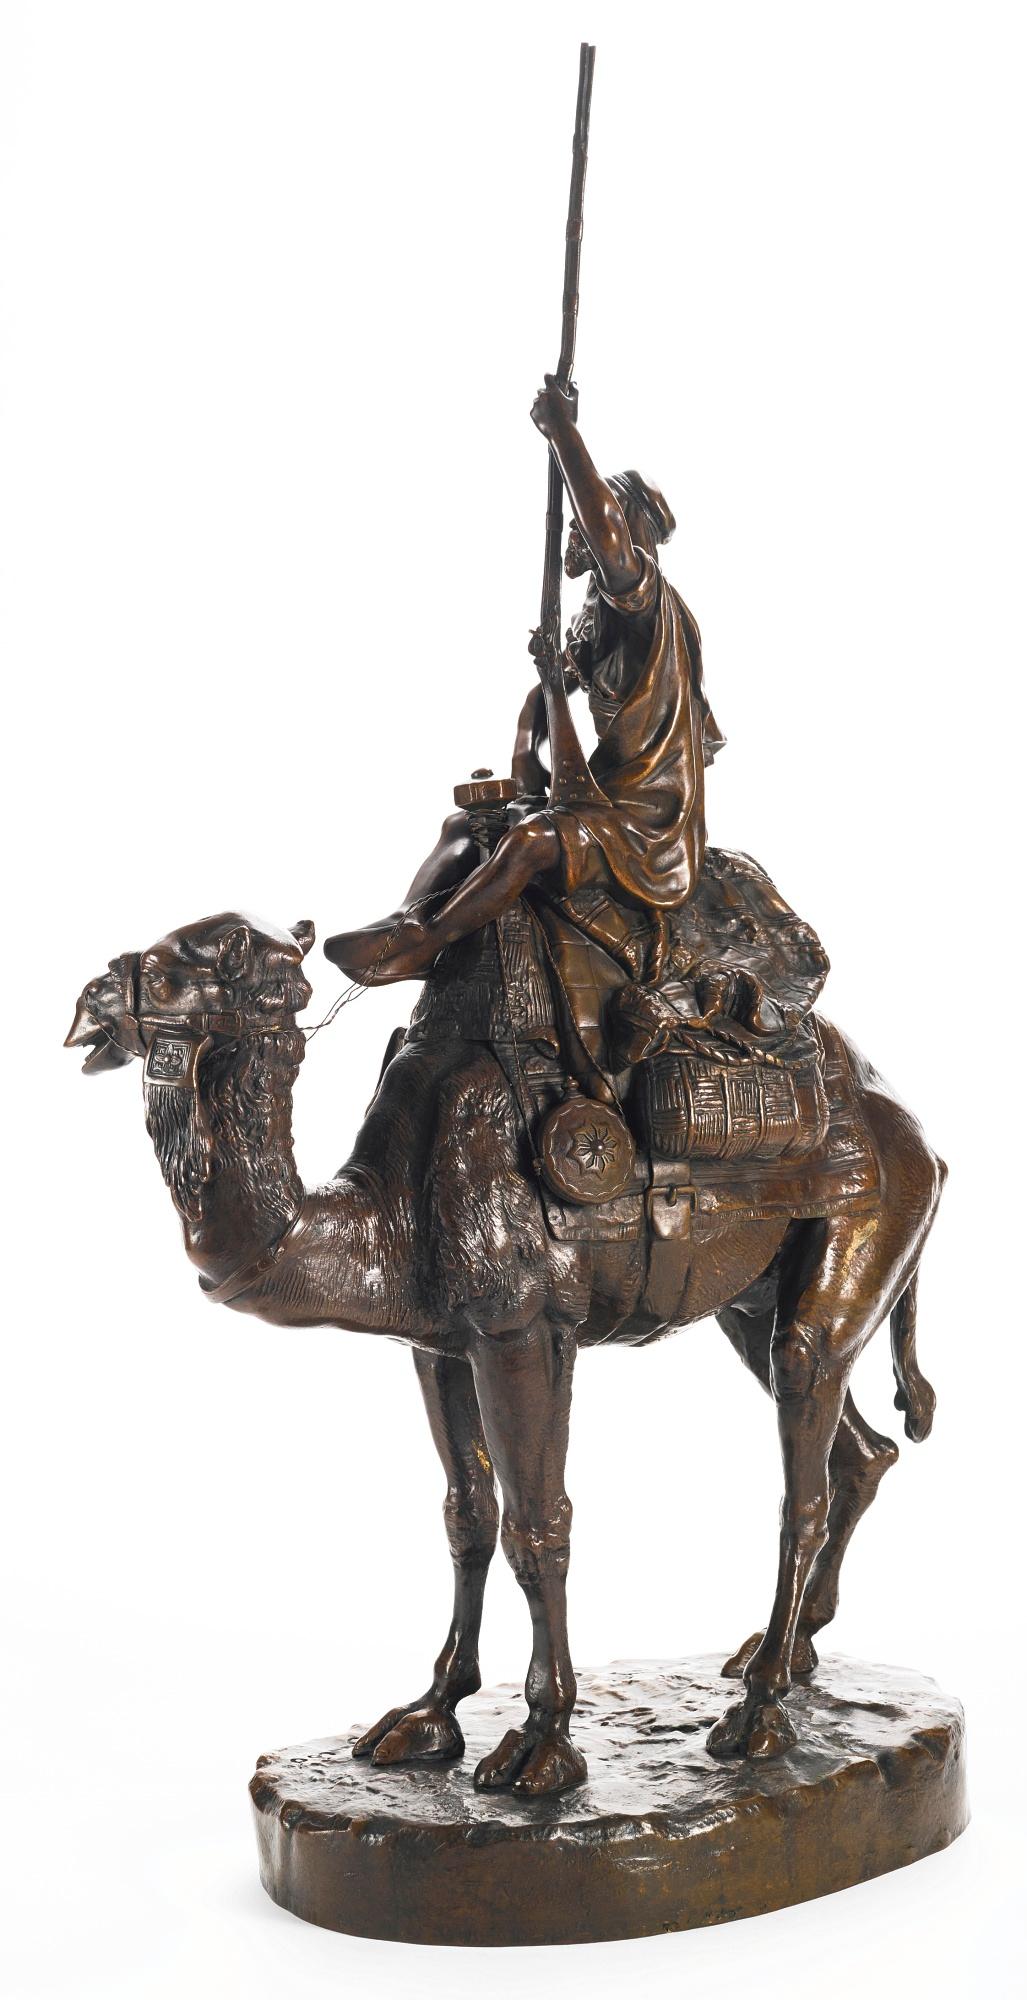 Patinated bronze orientalist sculpture Arab warrioron a Camel by Emile Pinédo.

Artist: Emile Pinédo (French, 1840-1916)
signed Pinédo with the bronze Garanti au Titre seal, titled
bronze, brown patina
Origin: French
Date: 19th century
height